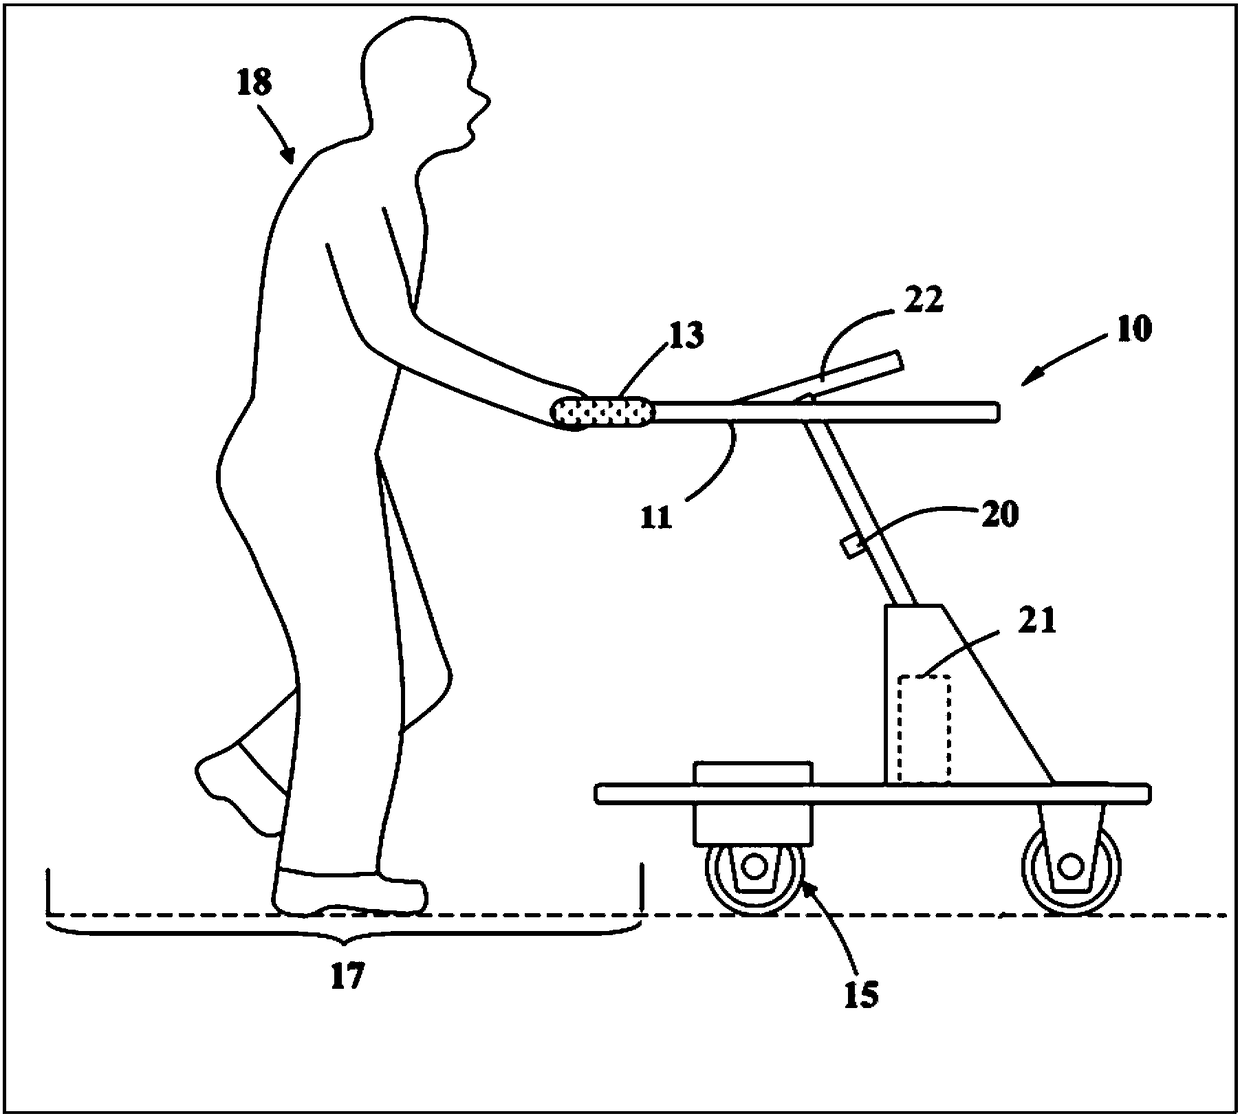 Electric walking assistance device for facilitating gait activity and application method thereof